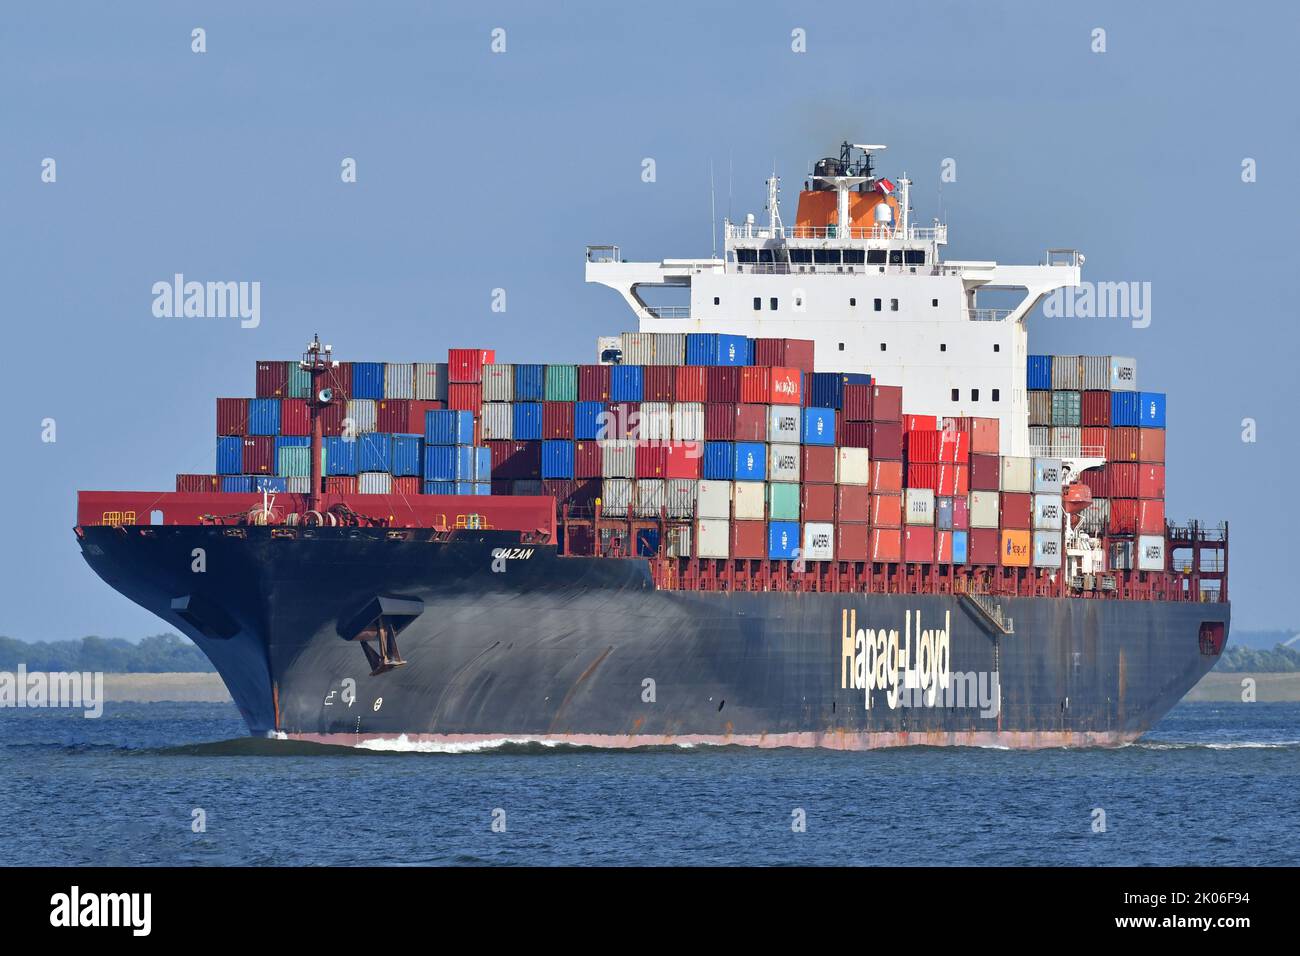 Containership JAZAN outbound from Hamburg, passing Cuxhaven Stock Photo